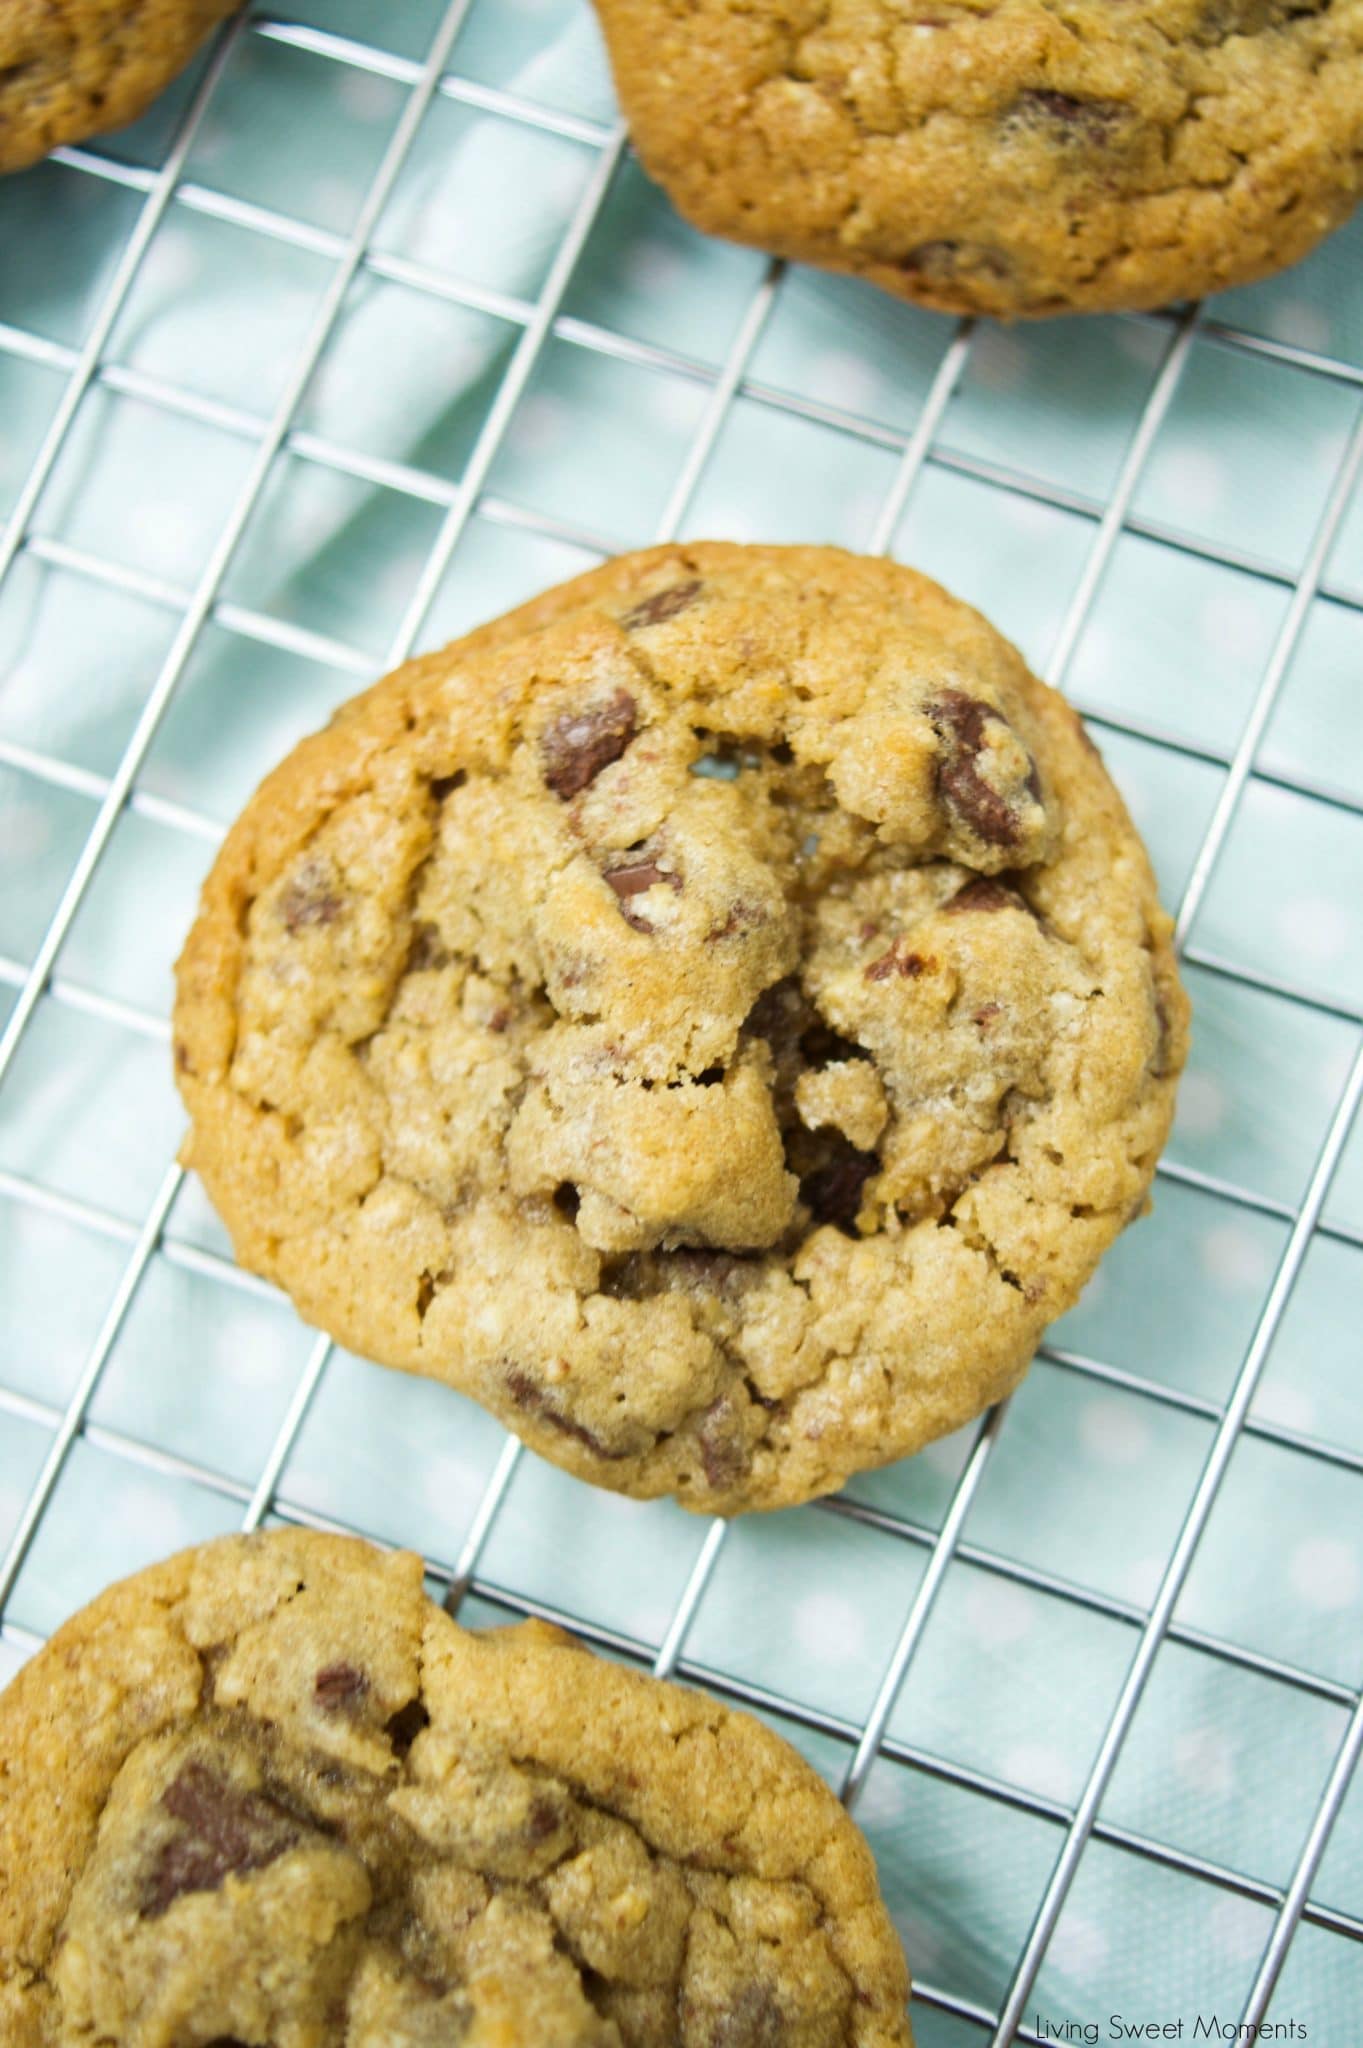 Try the World's Best Chocolate Chip Cookies recipe. They are chewy, chocolaty and so delicious. 2 secret ingredients set this recipe apart from the others. 